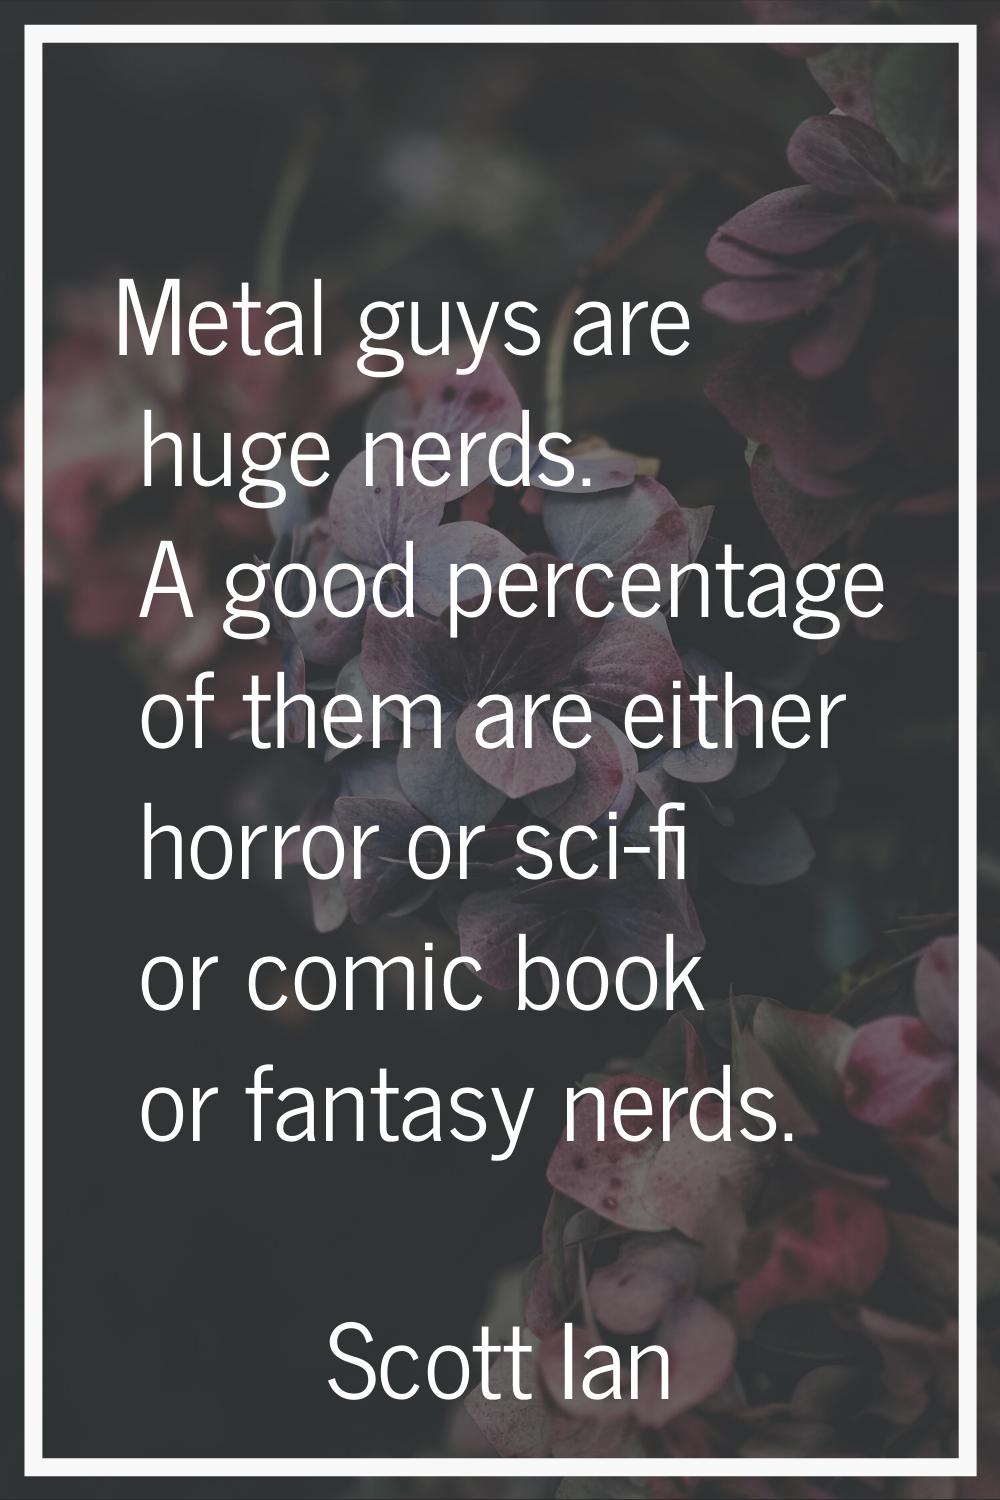 Metal guys are huge nerds. A good percentage of them are either horror or sci-fi or comic book or f